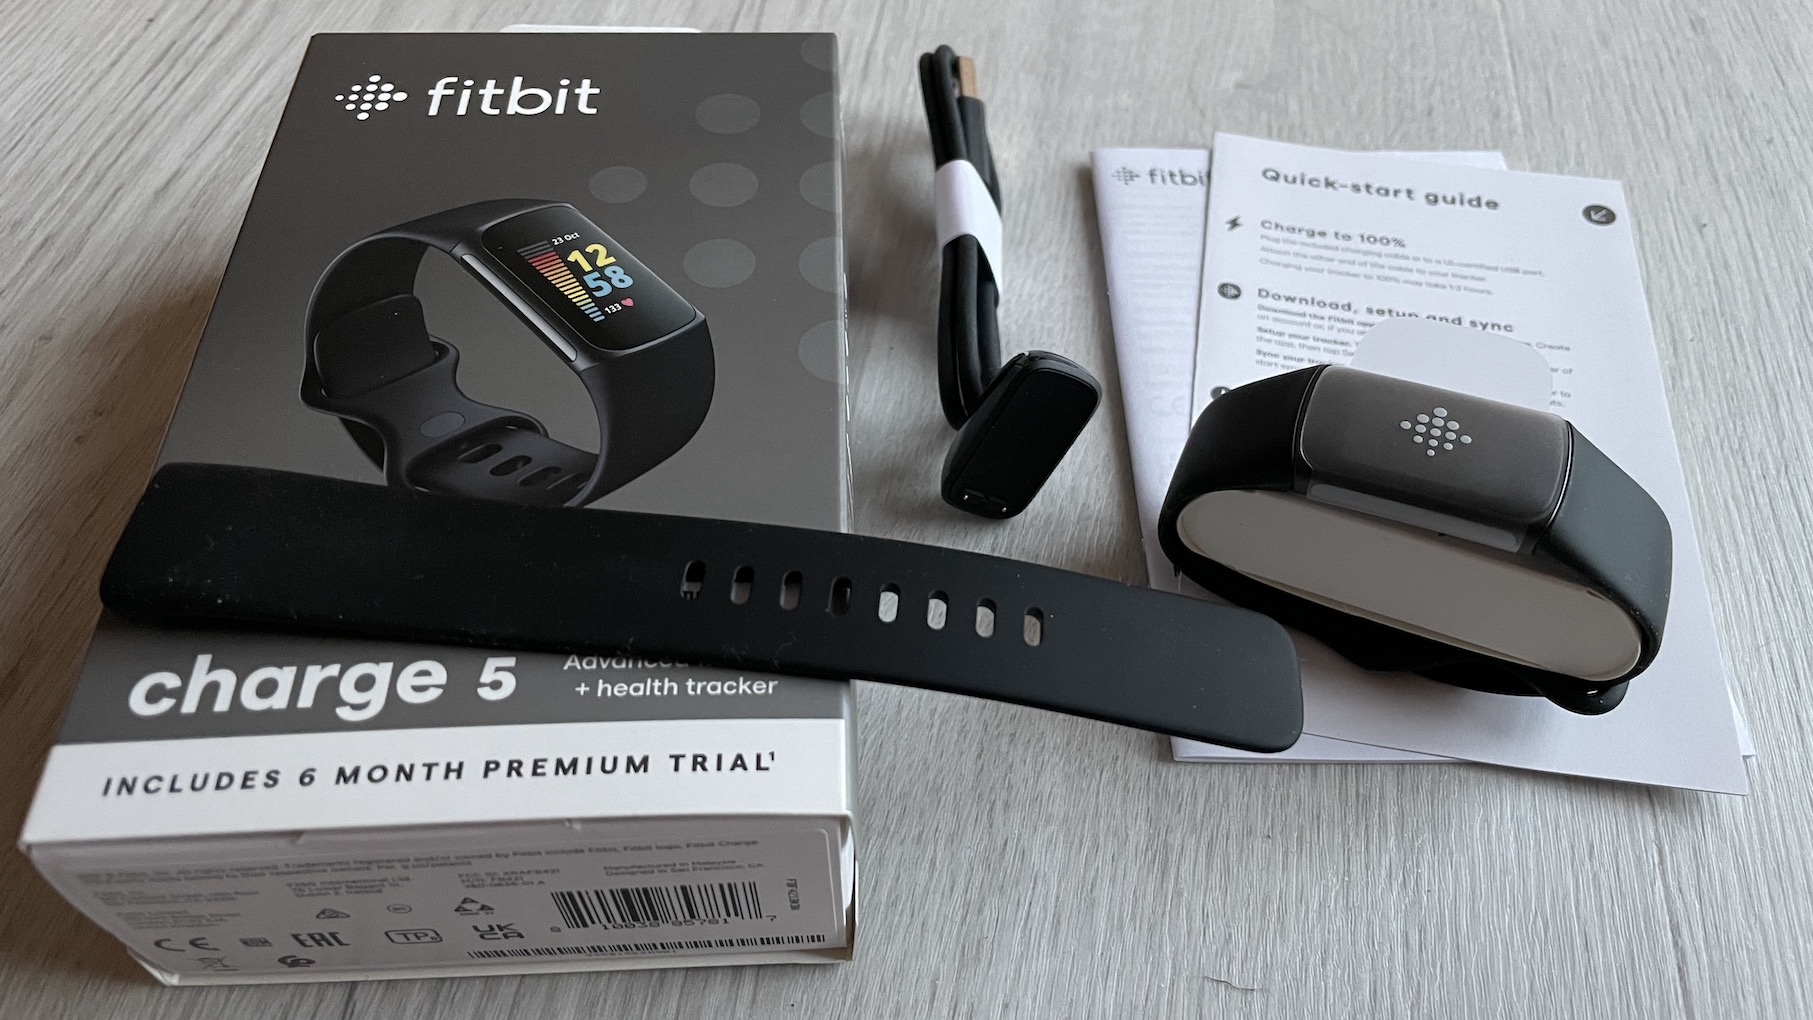 Fitbit Charge 5 smartwatch review: Many health functions for the